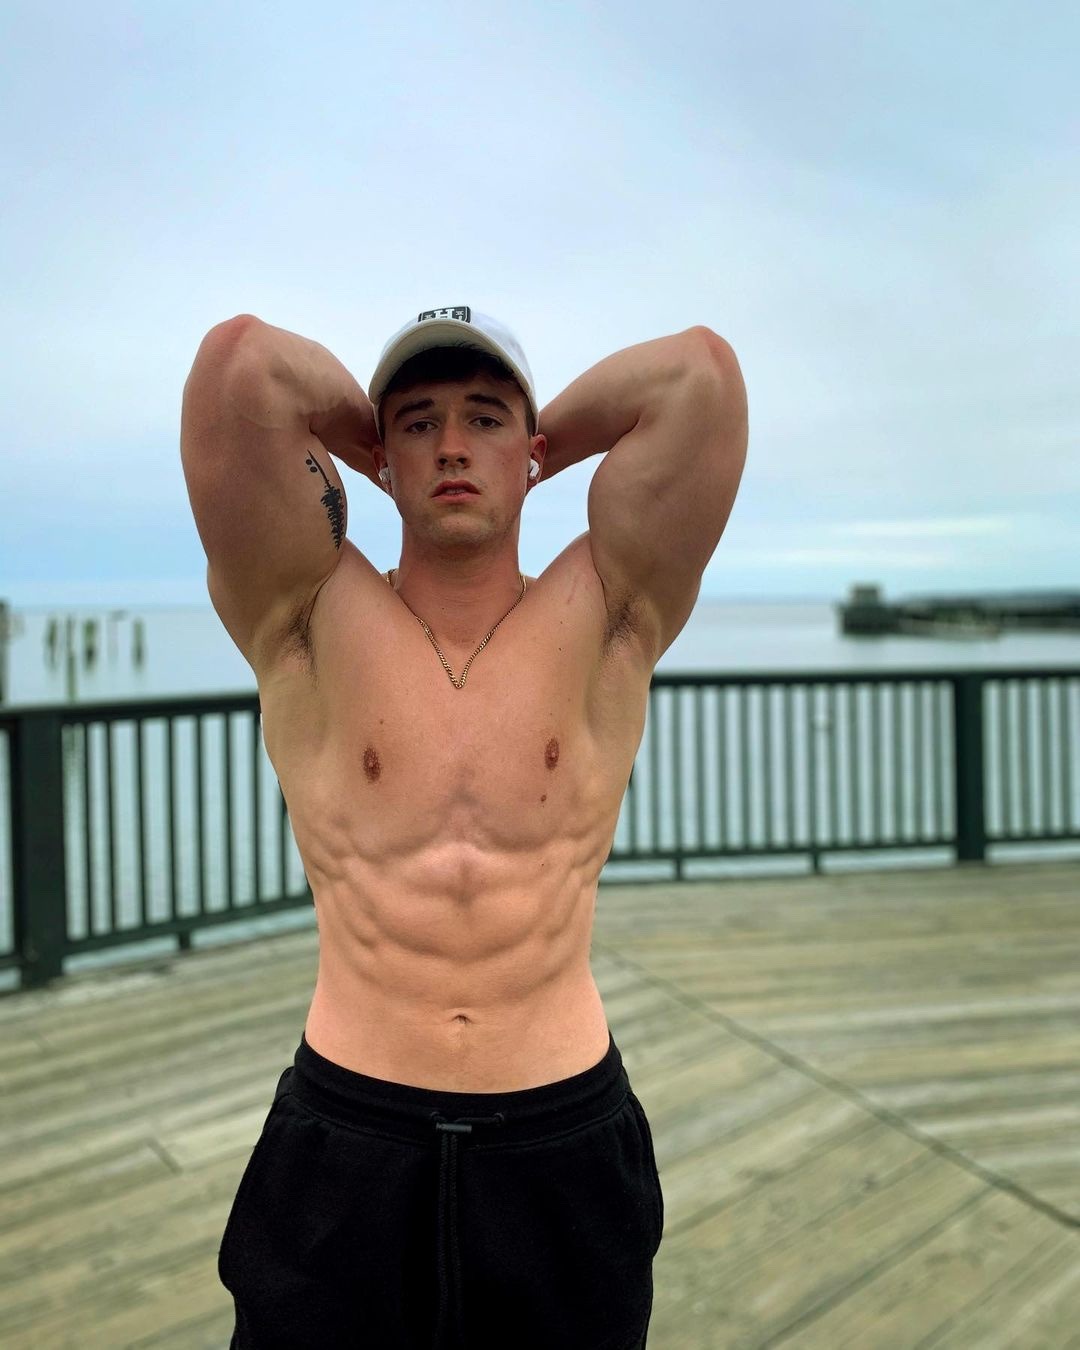 shirtless-hot-fit-young-guy-big-biceps-cocky-college-frat-bro-flex